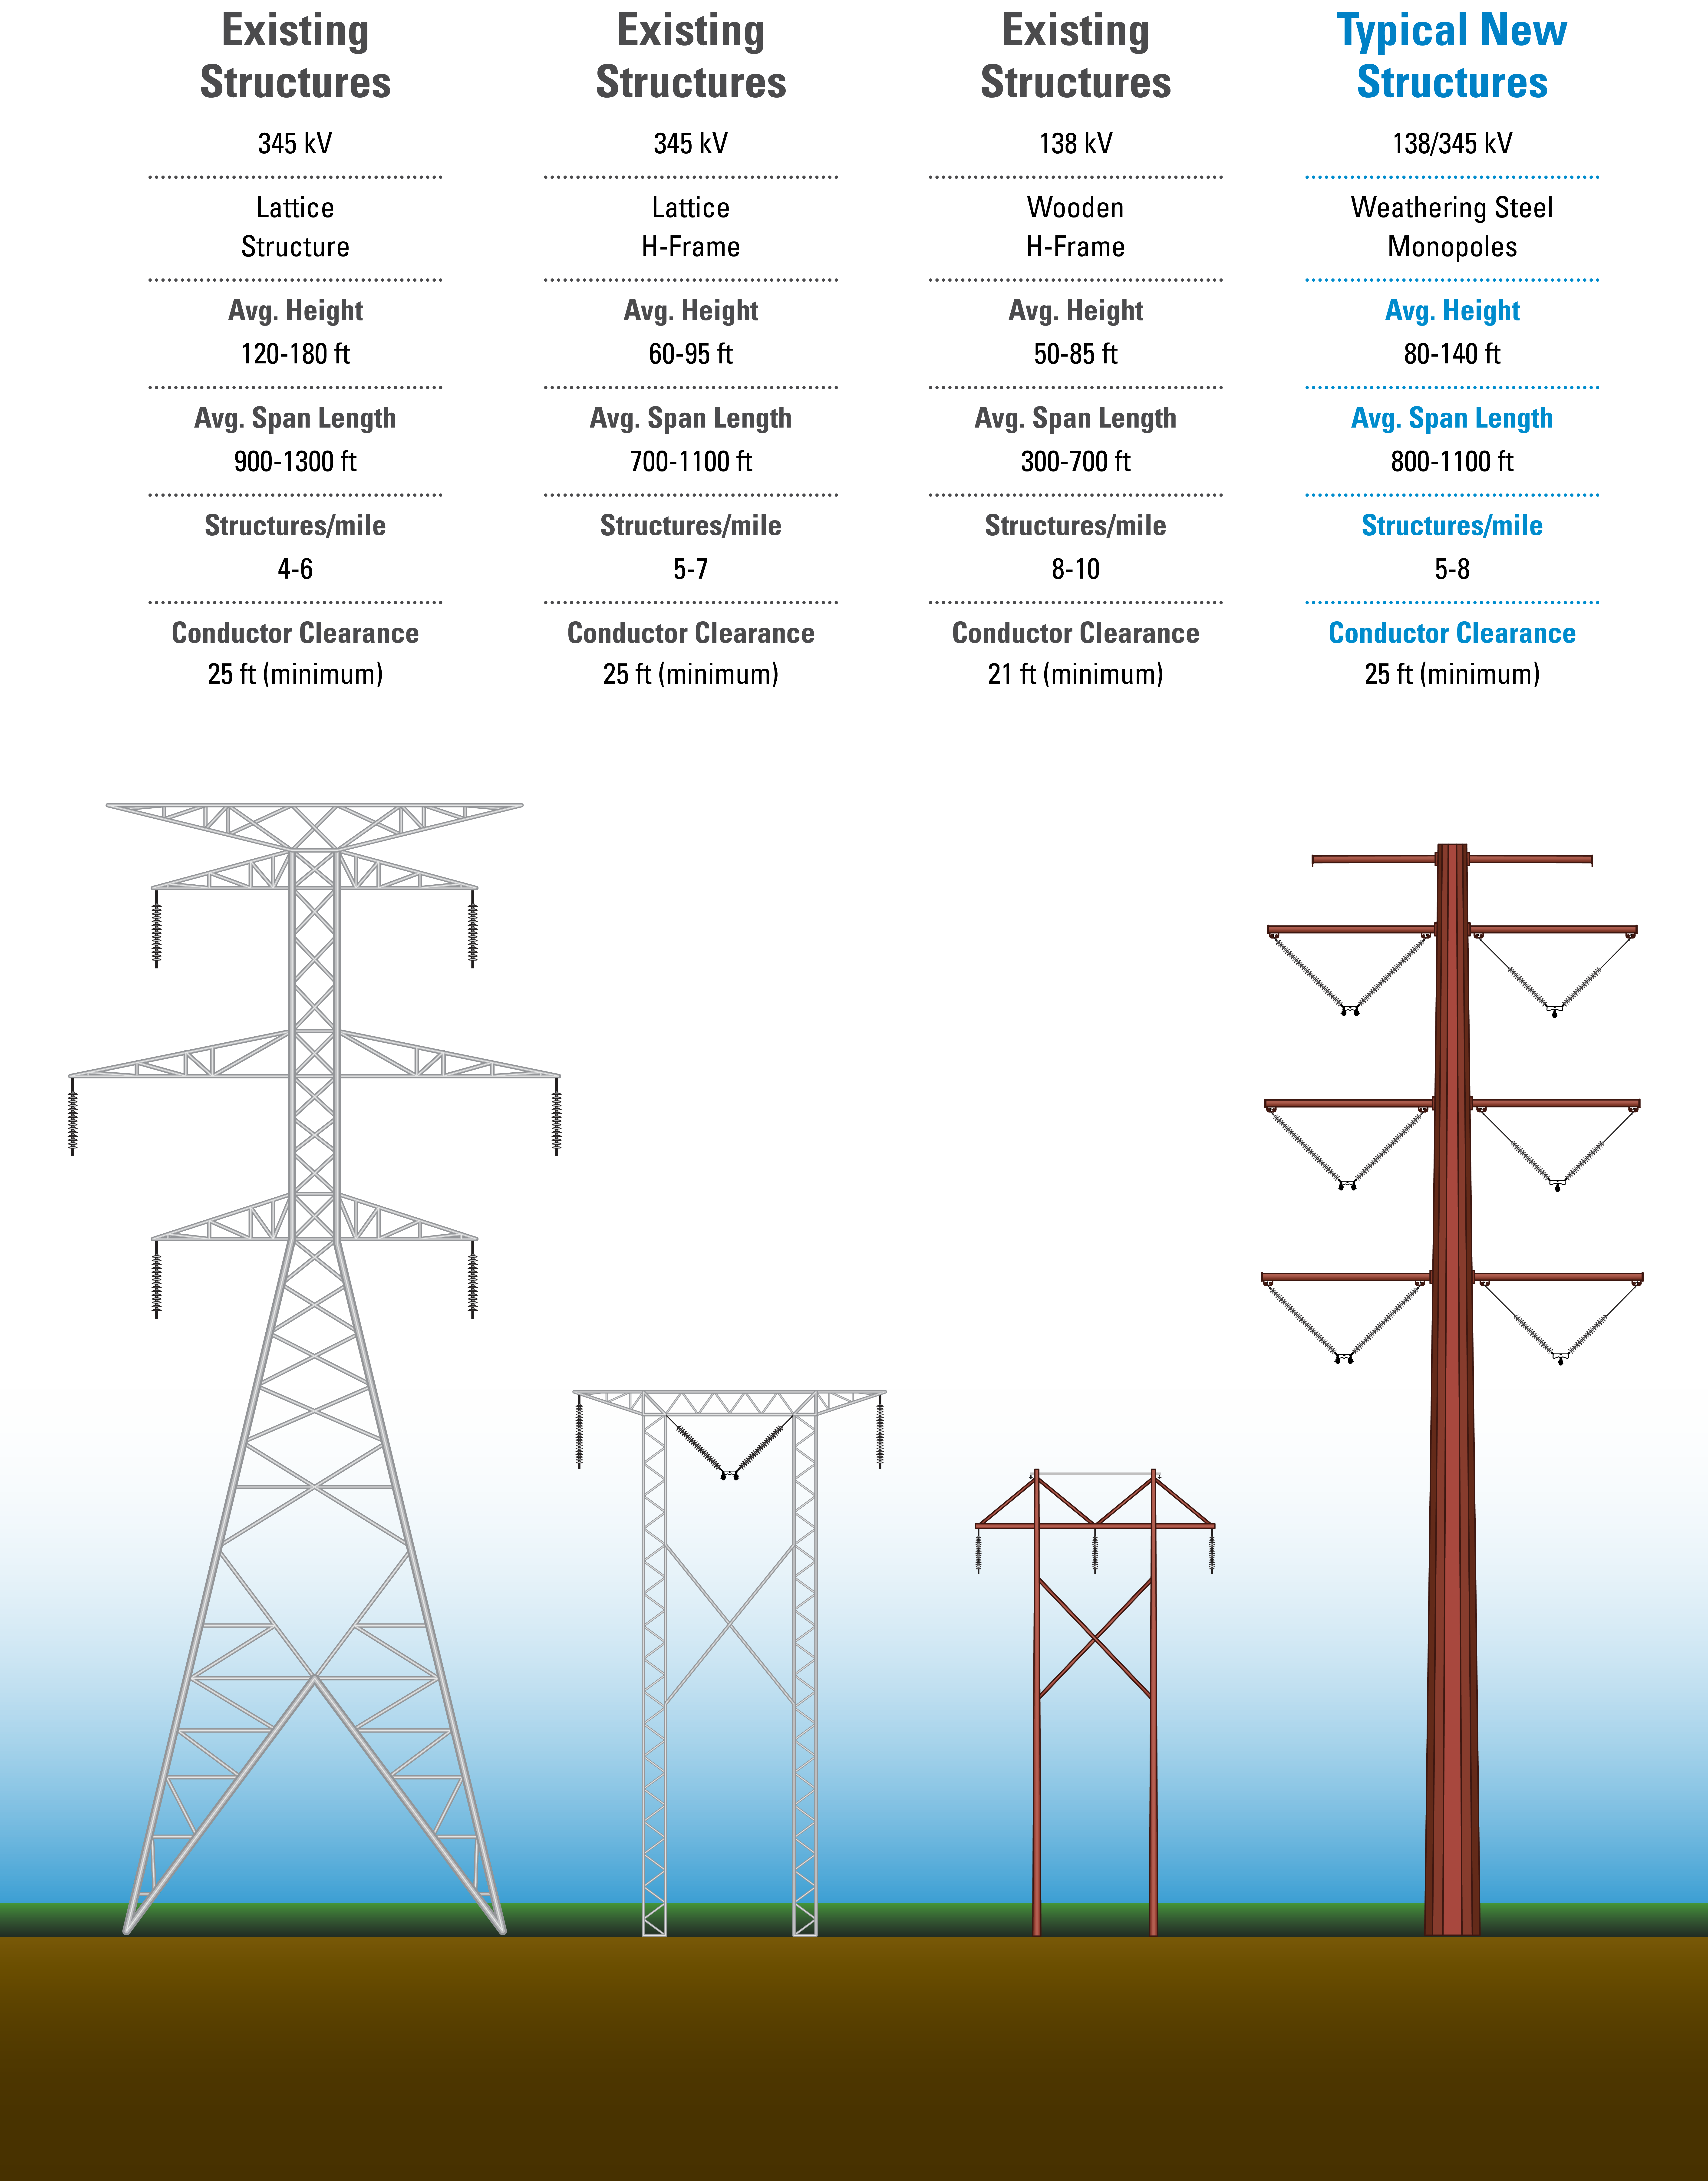 Four side by side structure graphics showing the existing structures and anticipated new structures for the county. Graphics are intended for information purposes only and are not to scale. New structure designs, including number of arms and type of foundation may vary depending on final route, soil conditions, circuit design, and presence of distribution.
                                                  Graphic 1 shows a 345 kV lattice structure with an average height of 120-180ft and average span length between 900-1300ft. Structures per mile averages between 4-6 miles with a conductor clearance of 25ft minimum. 
                                                  
                                                  Graphic 2 shows a 345 kV lattice H-Frame with an average height of 60-95ft and average span length between 700-1100ft. Structures per mile averages between 5-7 miles with a conductor clearance of 25ft minimum. 
                                                  
                                                  Graphic 3 shows the existing 138 kV wooden H-frame, with an average height of 50-85ft and average span length between 300-700ft. Structures per mile averages between 8-10 miles with a conductor clearance of 21ft minimum. 
                                                  
                                                  Graphic 4 shows the anticipated new structure as a 138/345 kV weathering steel monopole with an average height of 80-140ft and average span length between 800-1100 ft. Structures per mile averages between 5-8 miles with a conductor clearance of 25ft minimum.